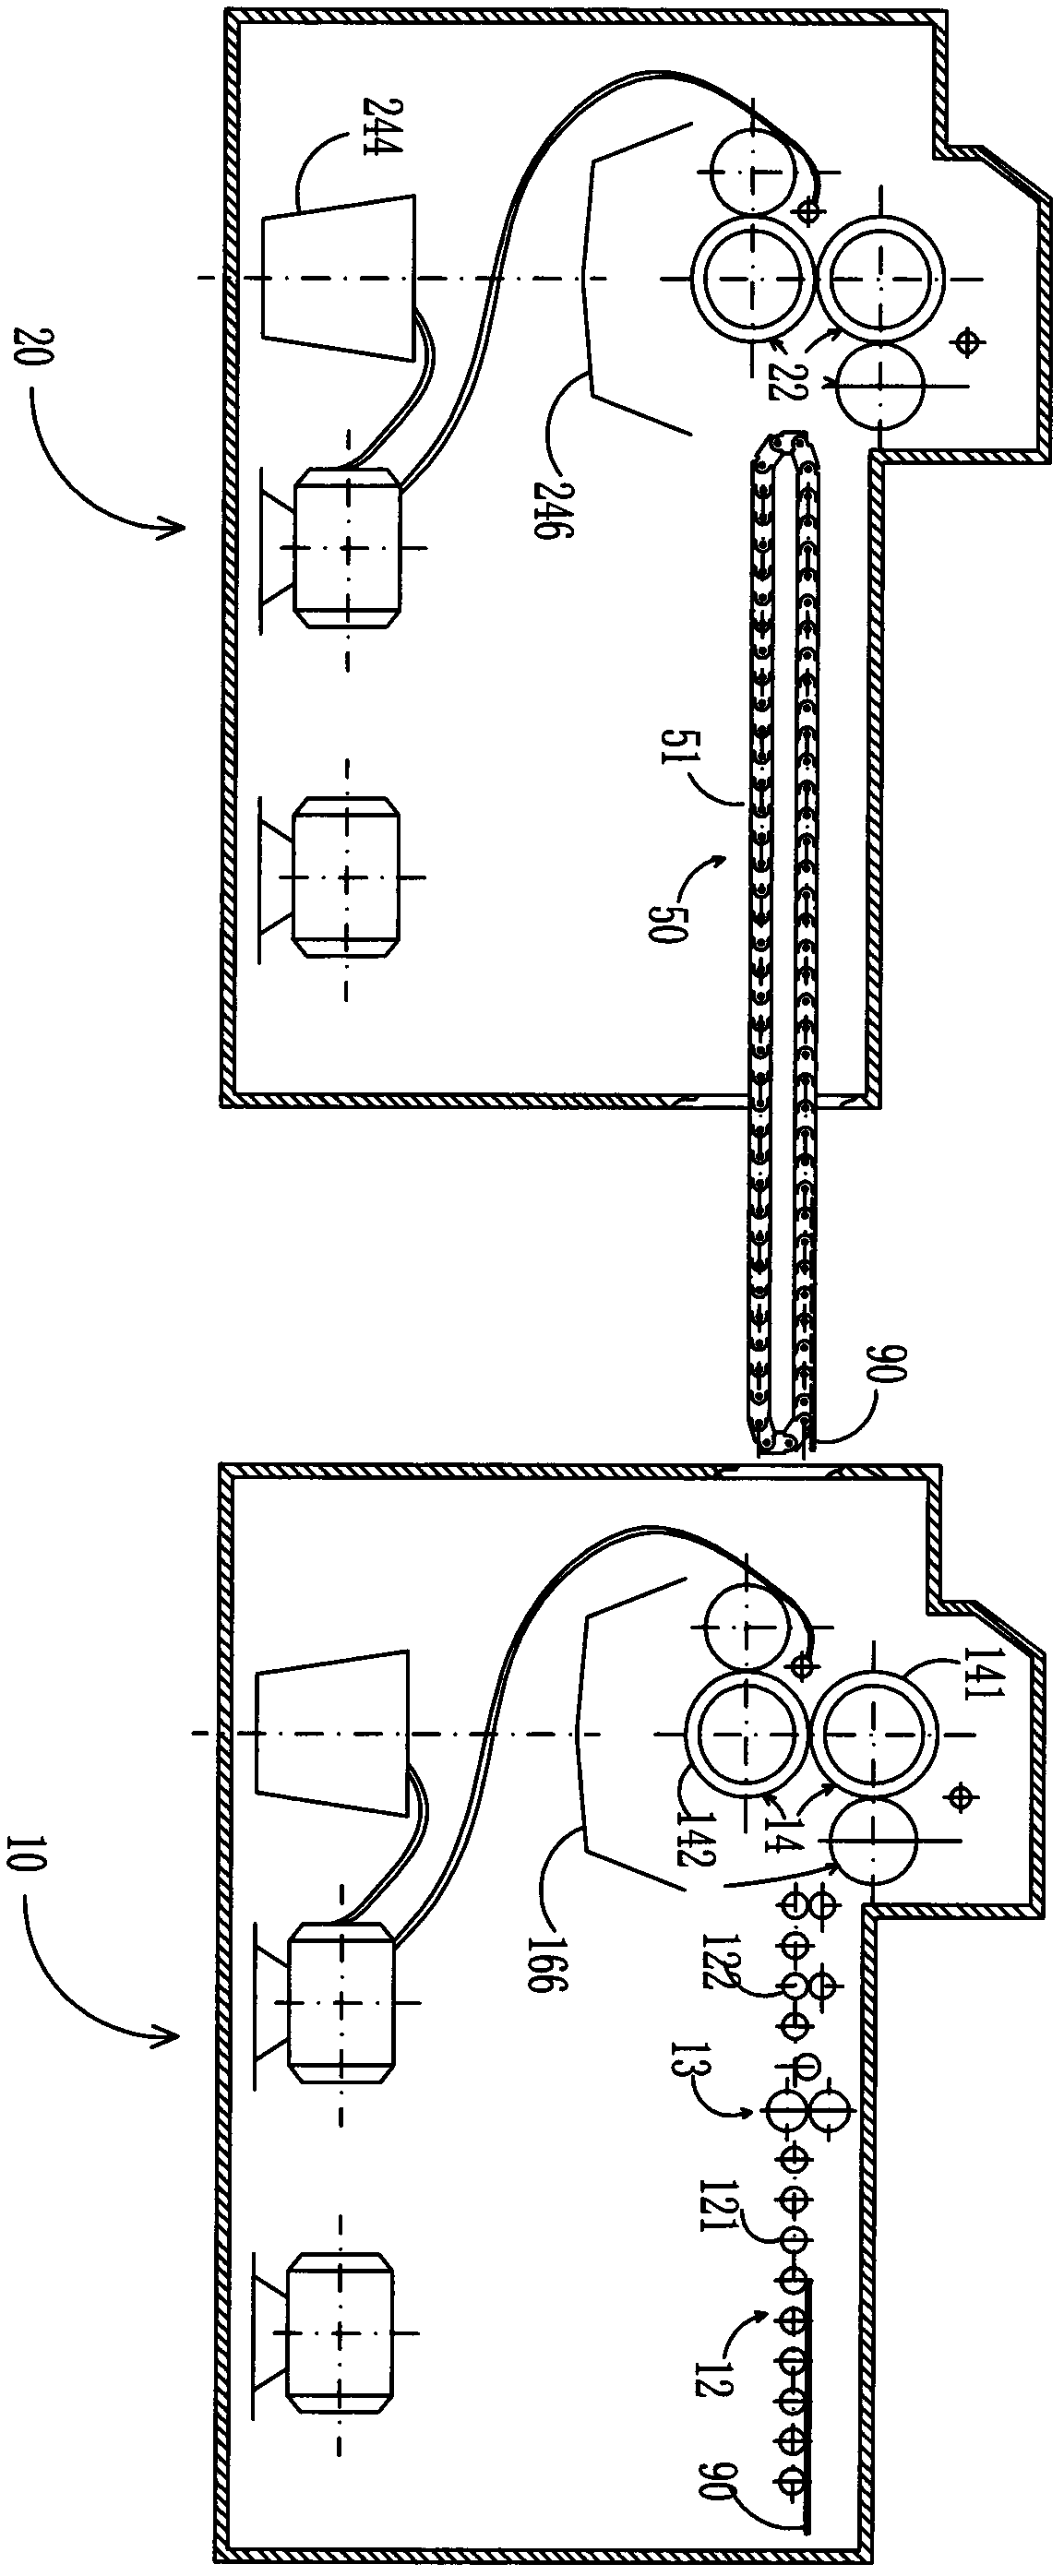 Printed circuit board solder resist ink coating technology and coating apparatus